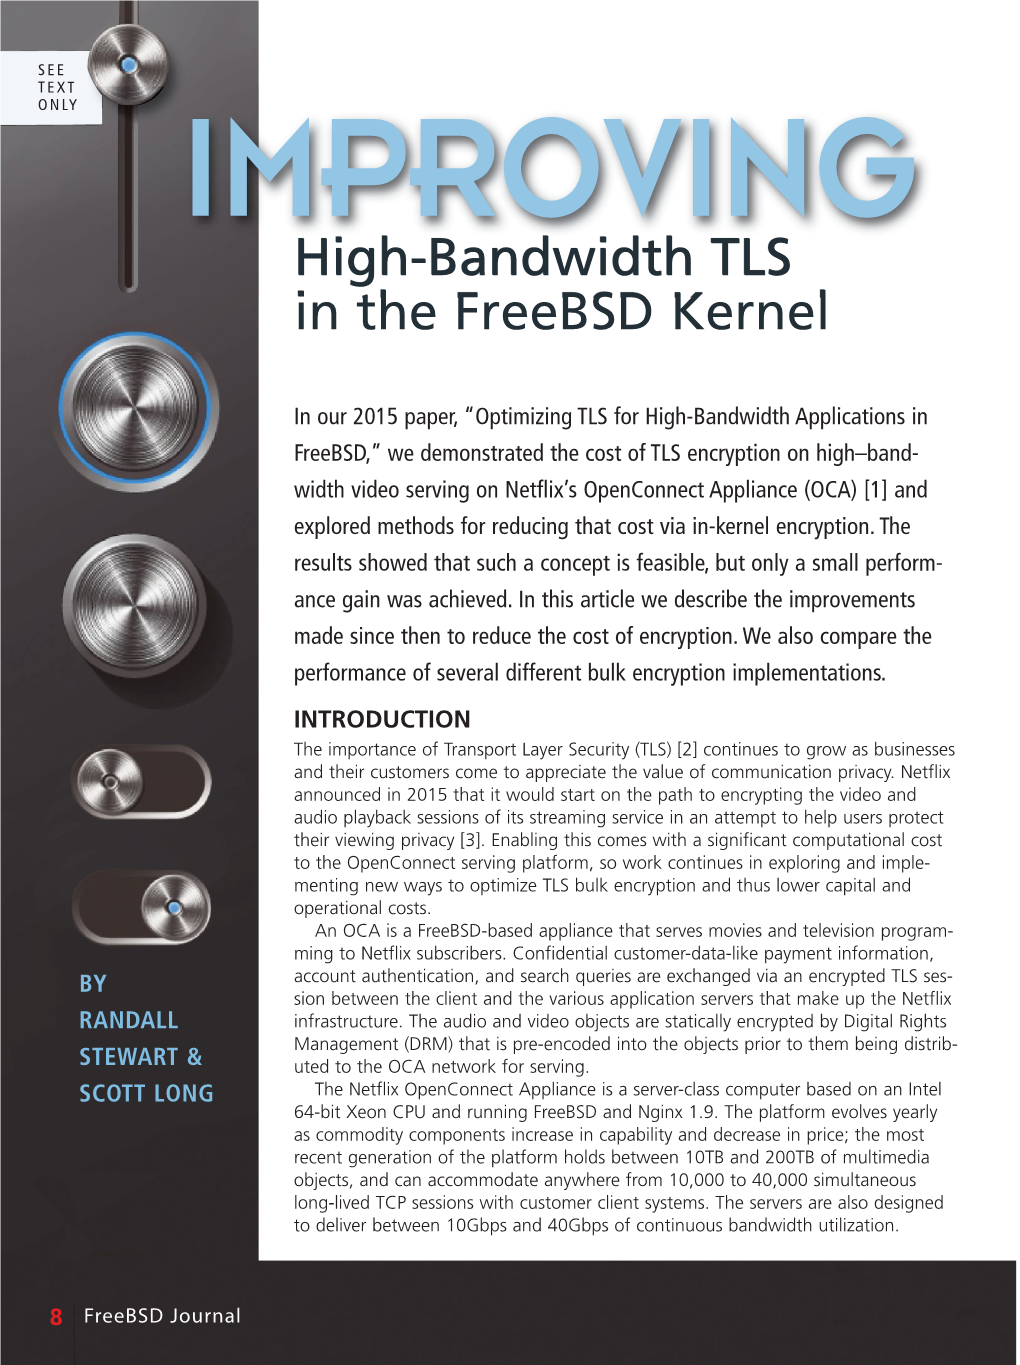 Improving High Bandwidth TLS in the Freebsd Kernel